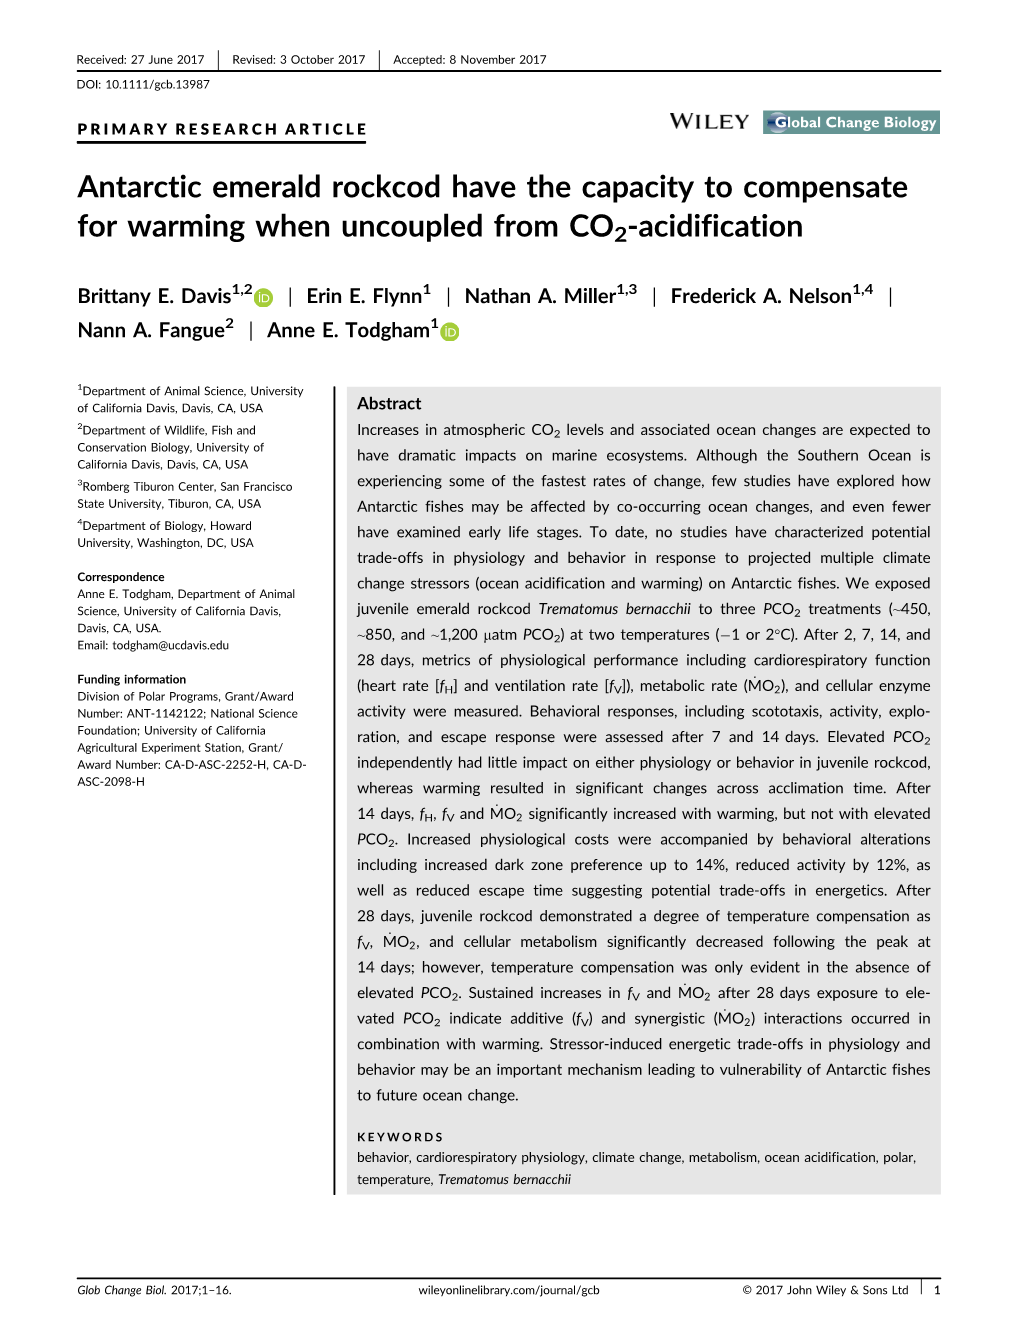 Antarctic Emerald Rockcod Have the Capacity to Compensate for Warming When Uncoupled from CO2-Acidification